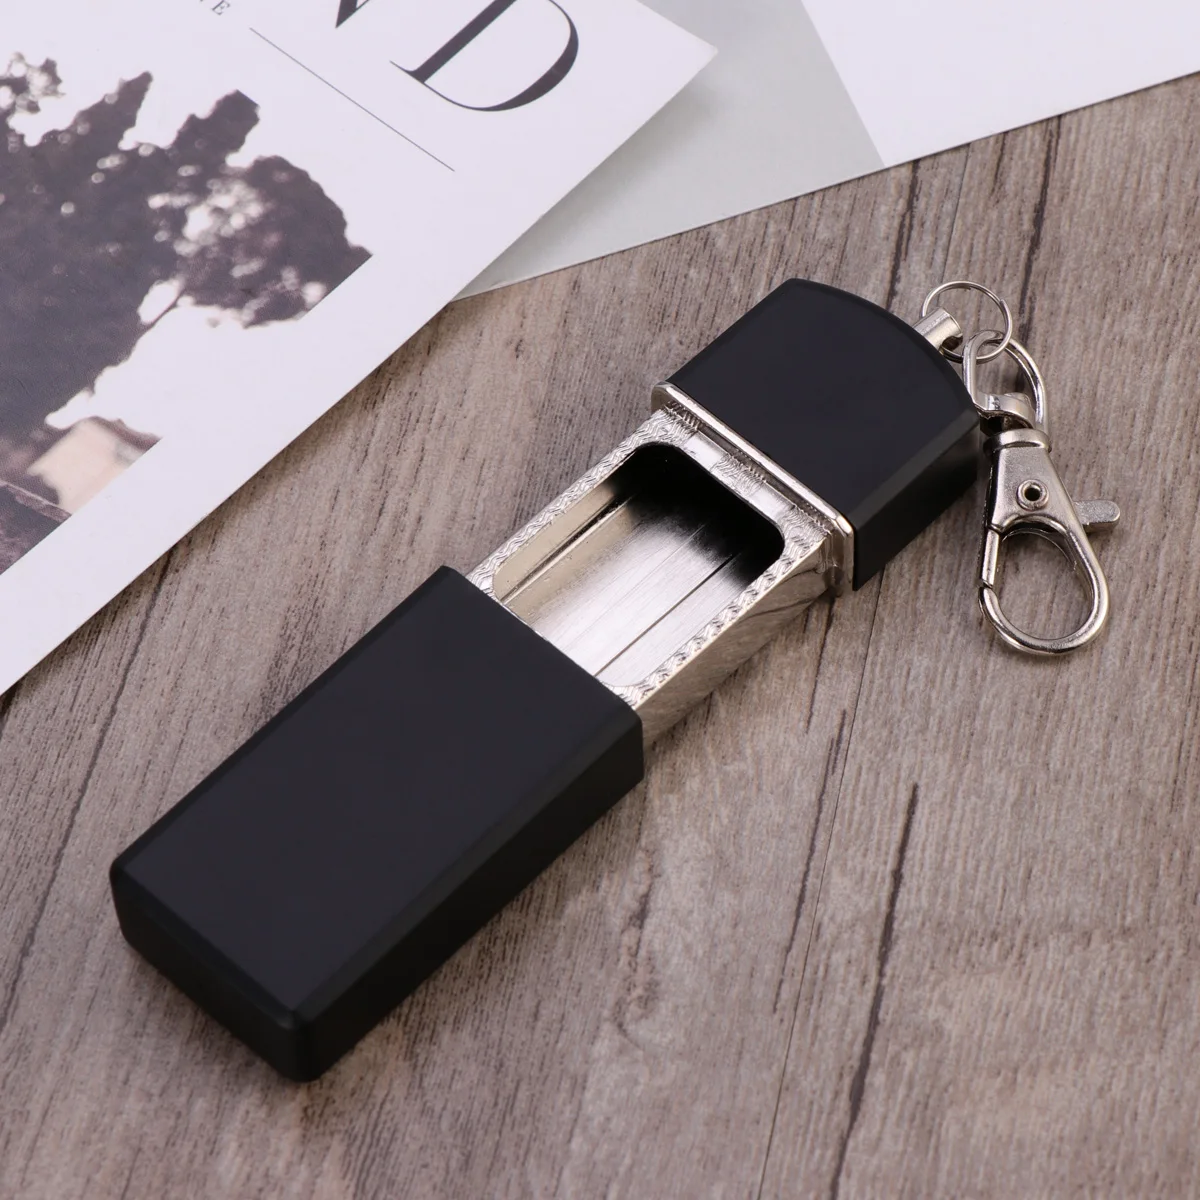 Snner Portable Ashtray For Handbag Pocket Ash Holder Ash Tray With Lid Keychain For Outdoor Drive